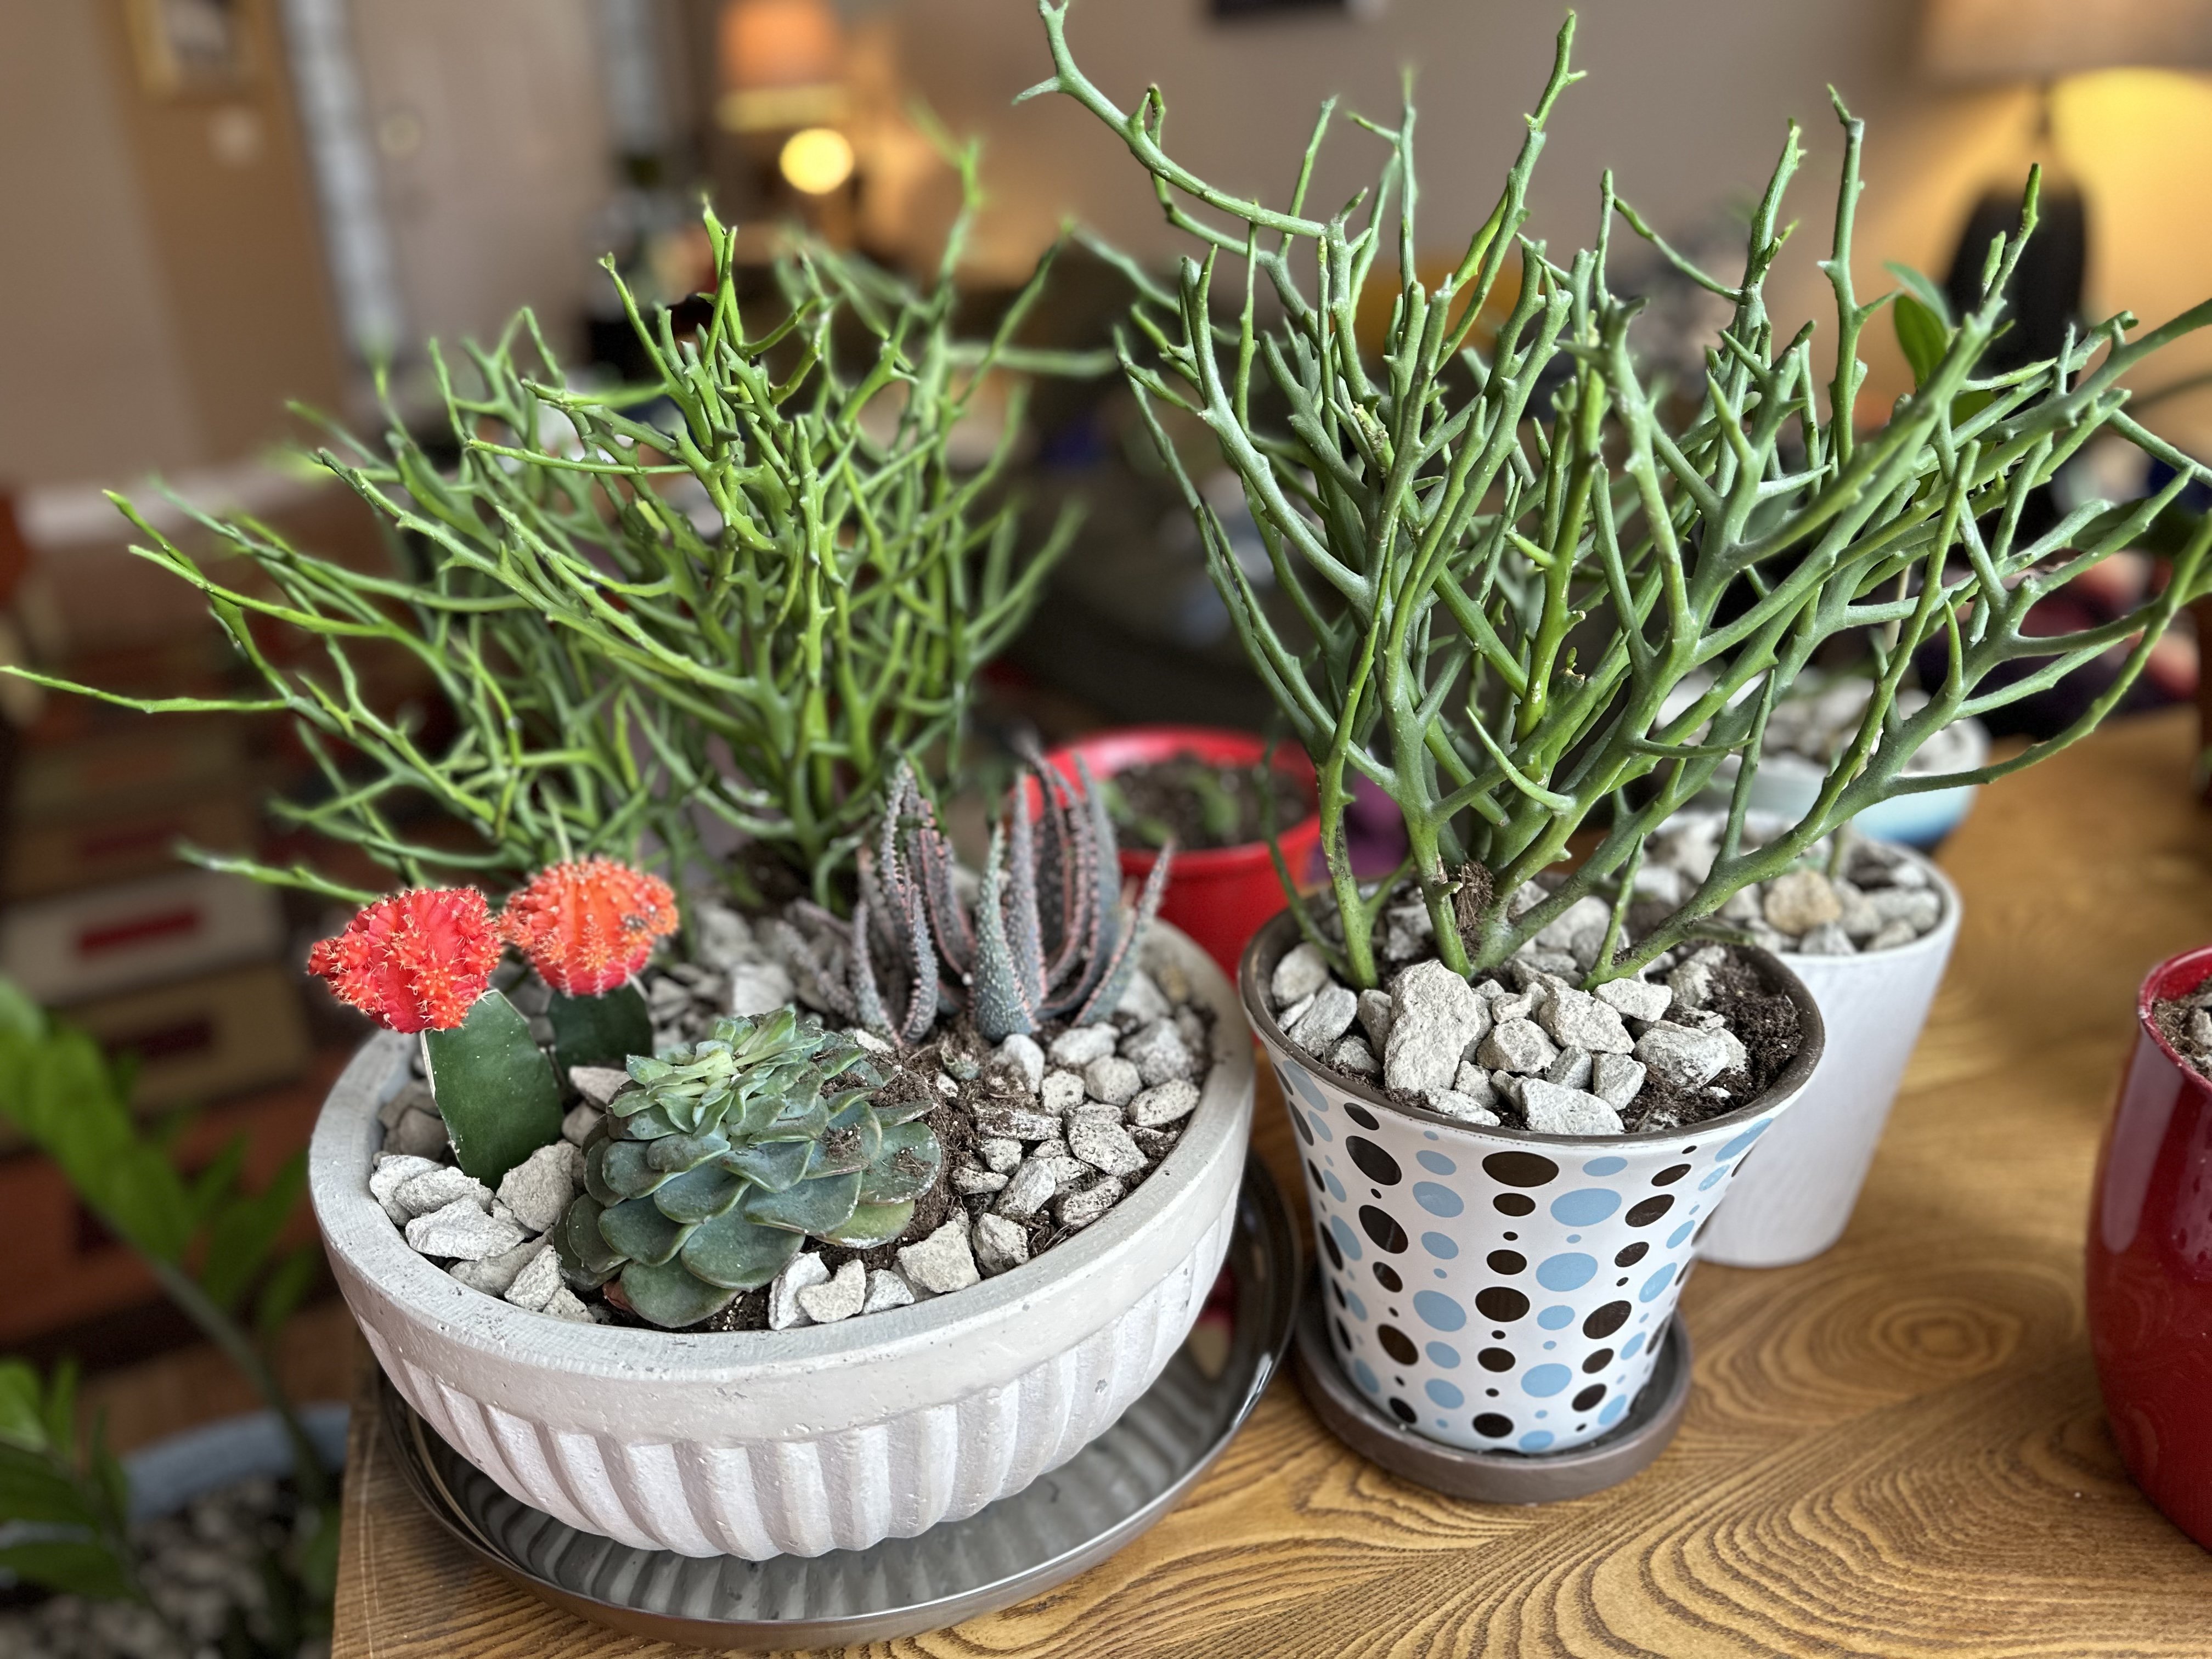 Two pots containing succulents. One pot has two cacti, a green succulent, a green coral-looking plant, and a purple aloe plant. The other pot contains a green coral looking plant.